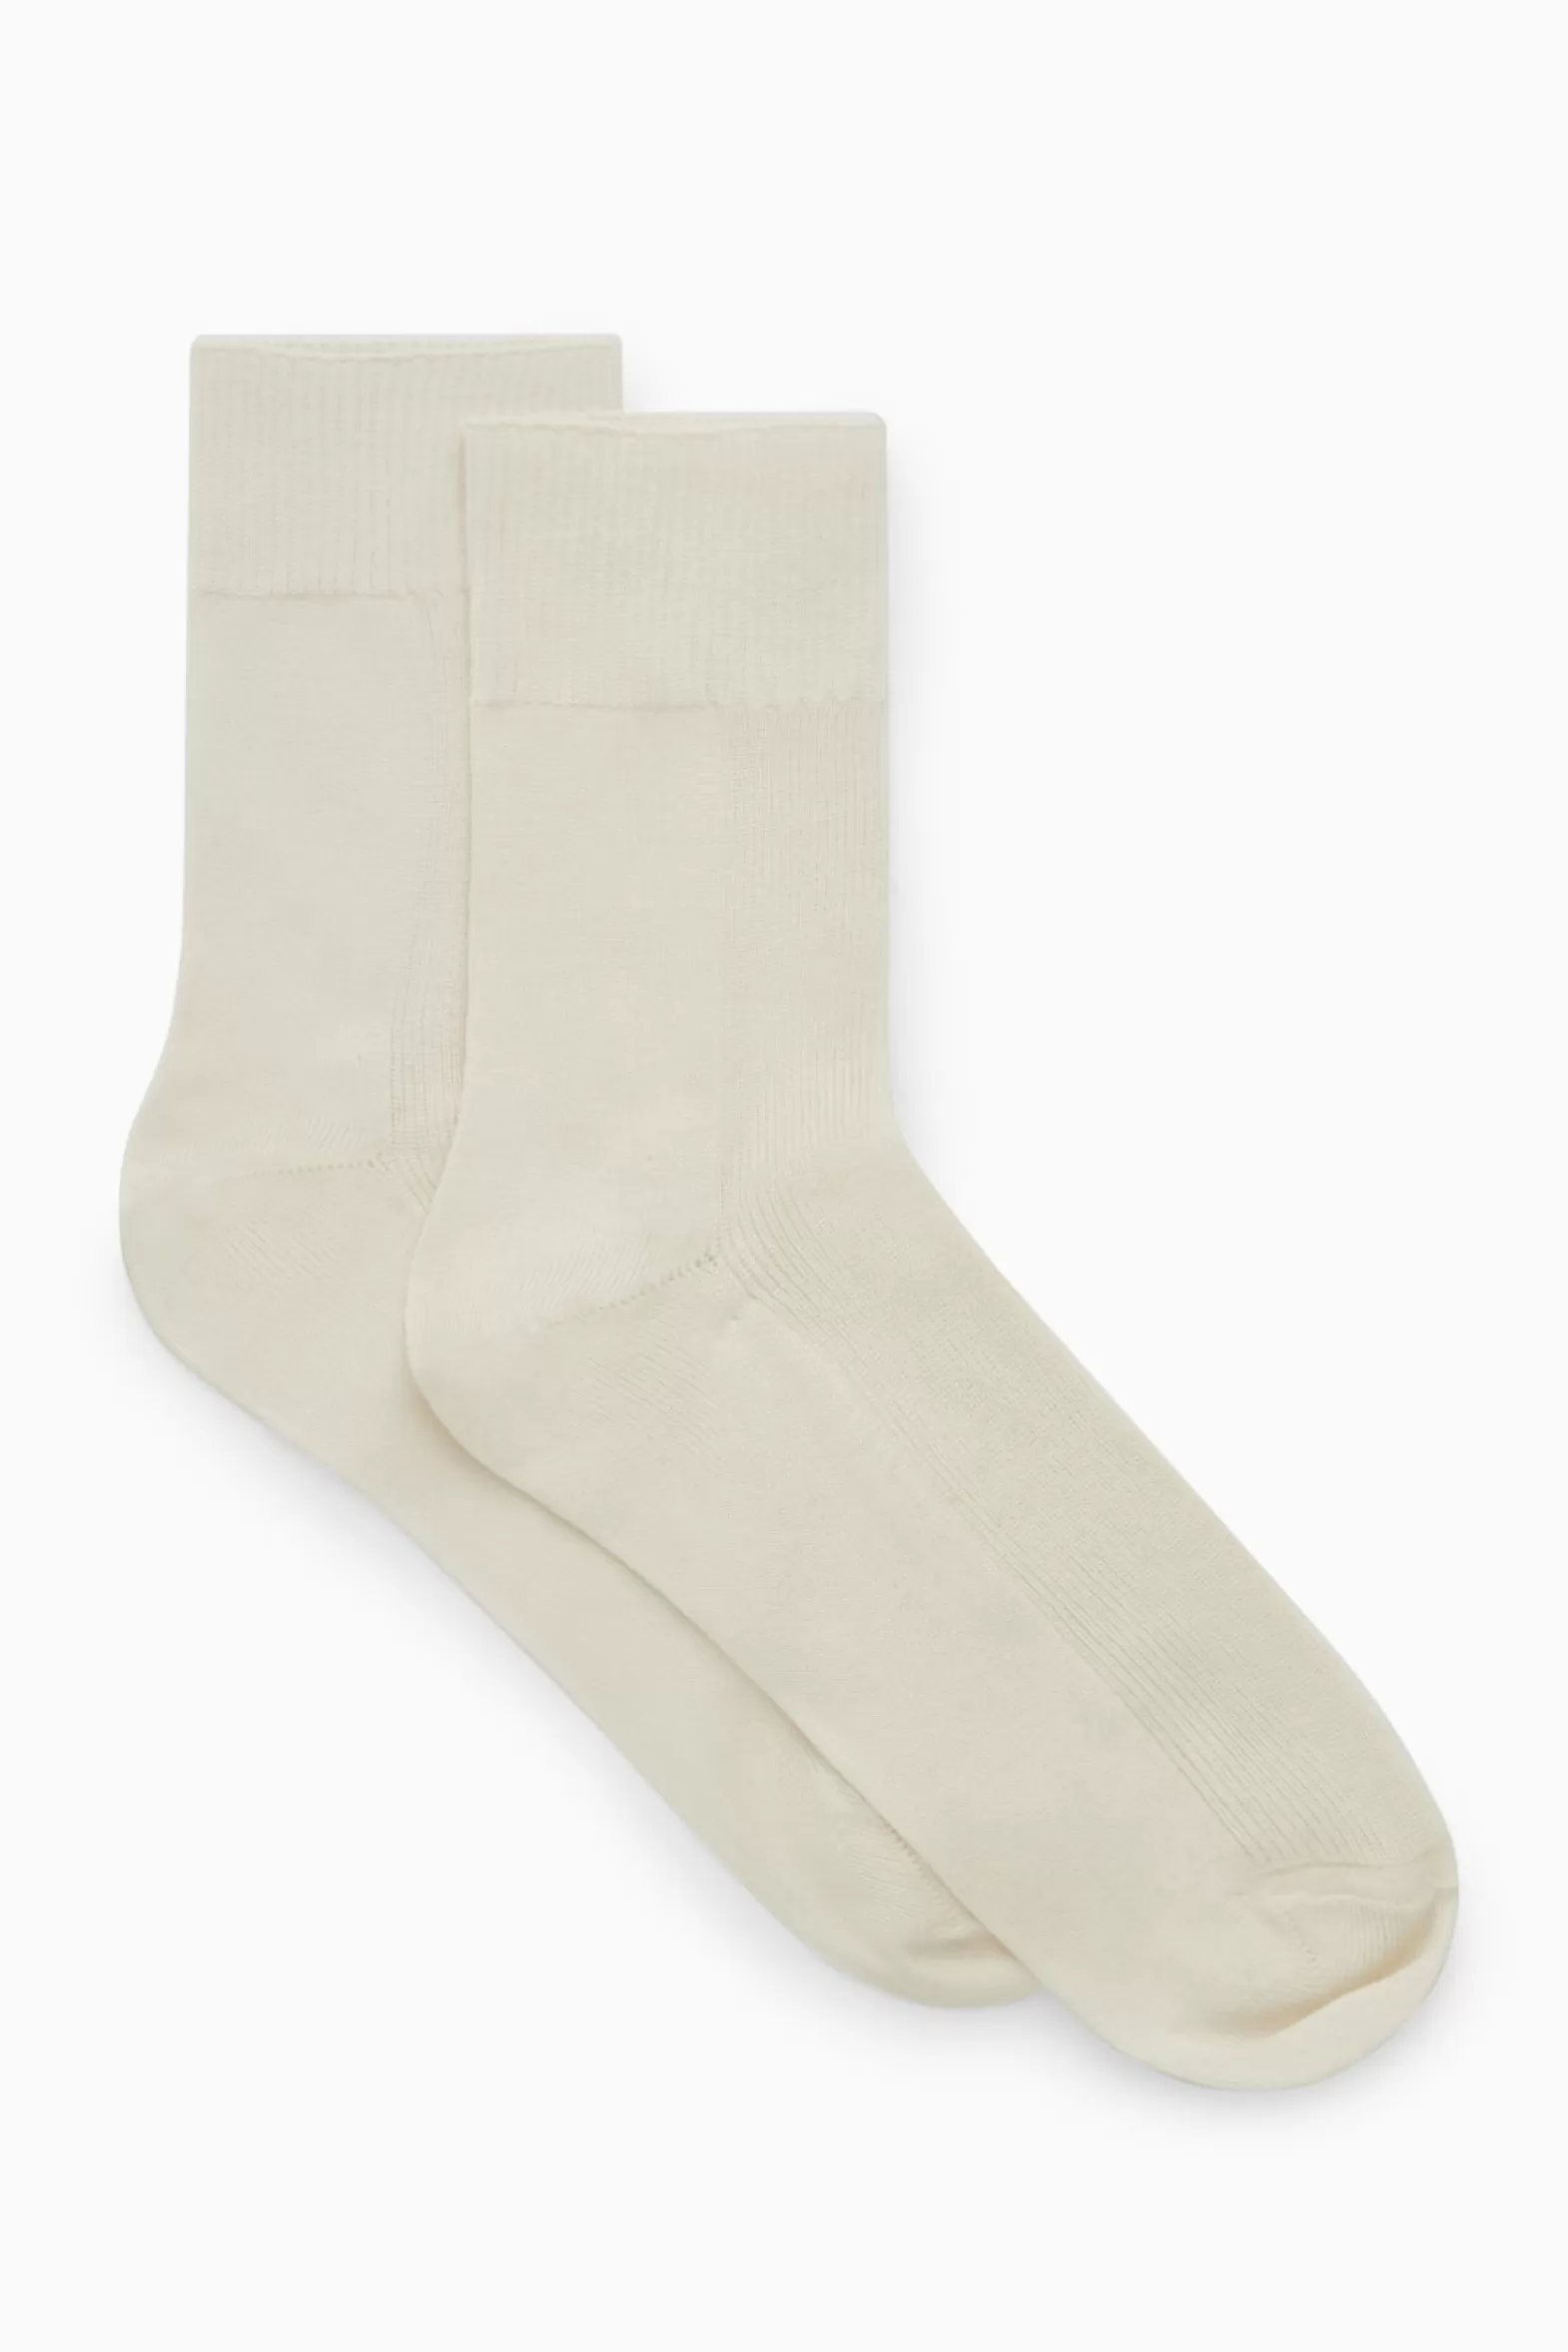 COS 2-PACK RIBBED PANEL SOCKS